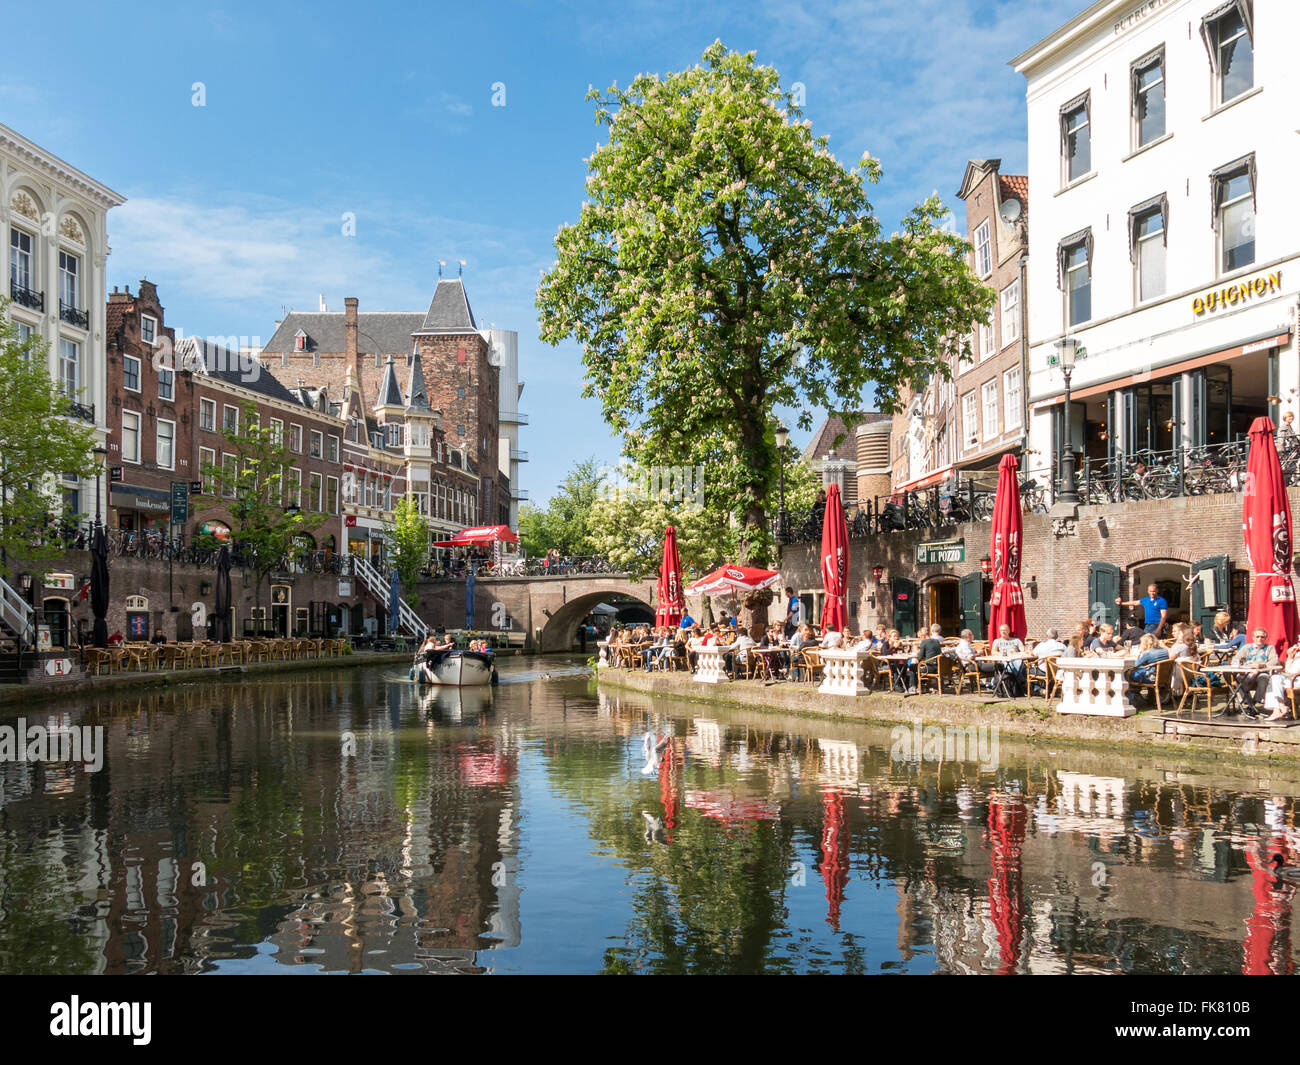 Oudaen Castle and people on outdoor terrace of restaurants alongside Oudegracht canal in the city of Utrecht, Netherlands Stock Photo